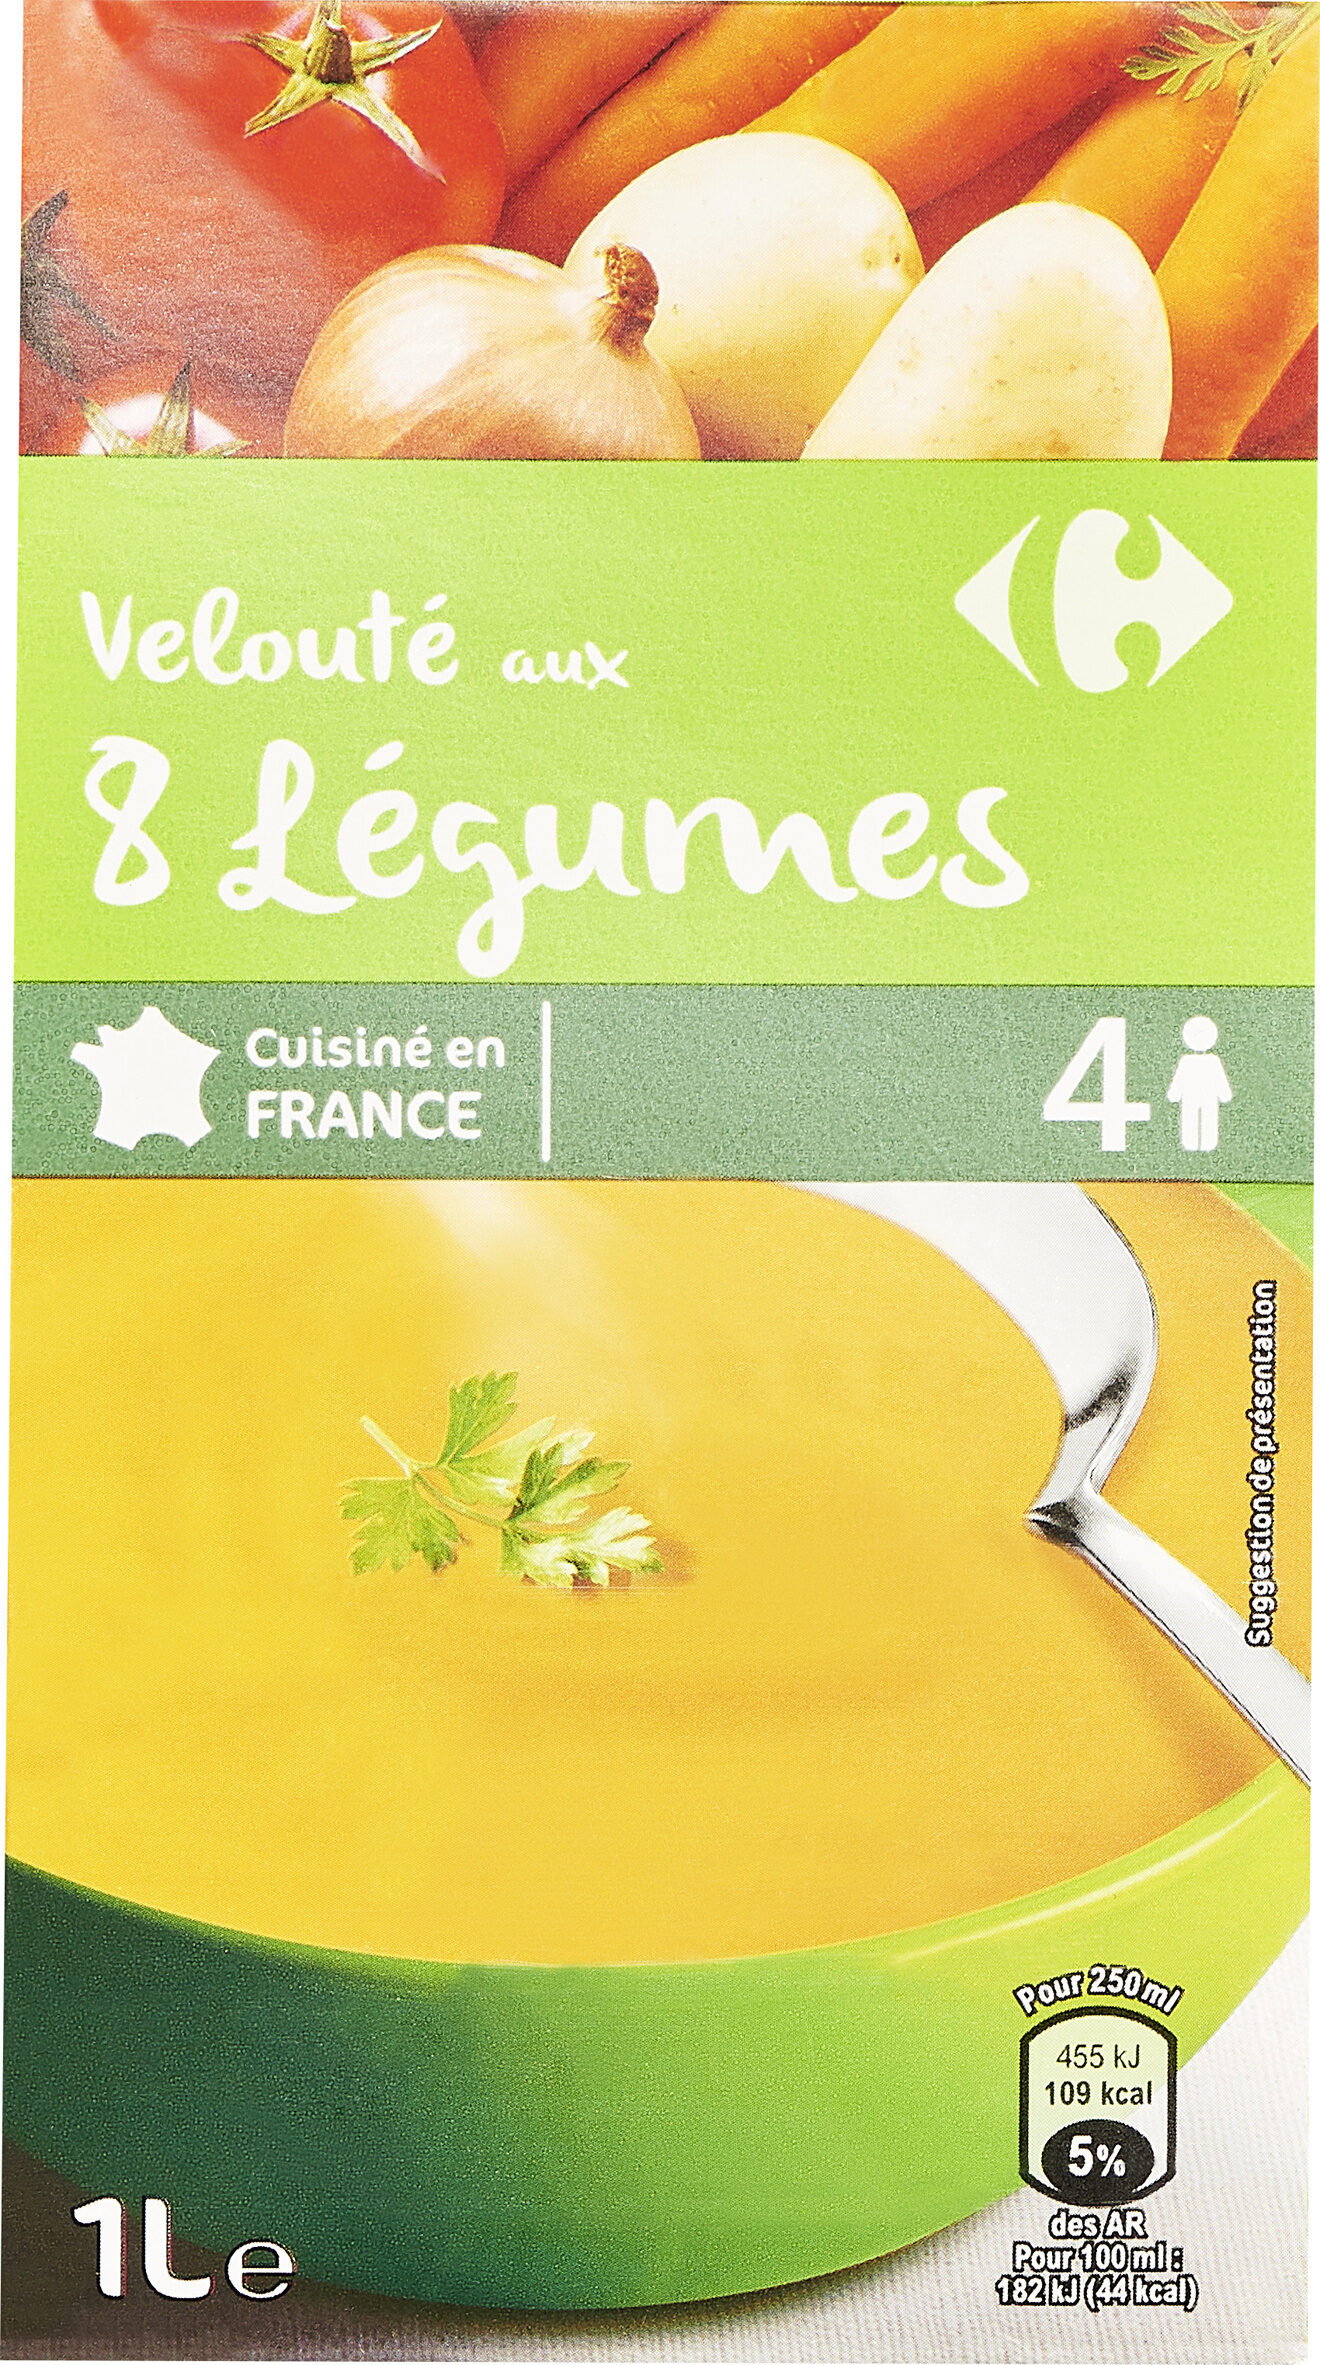 Veloute 8 legumes - Producto - fr